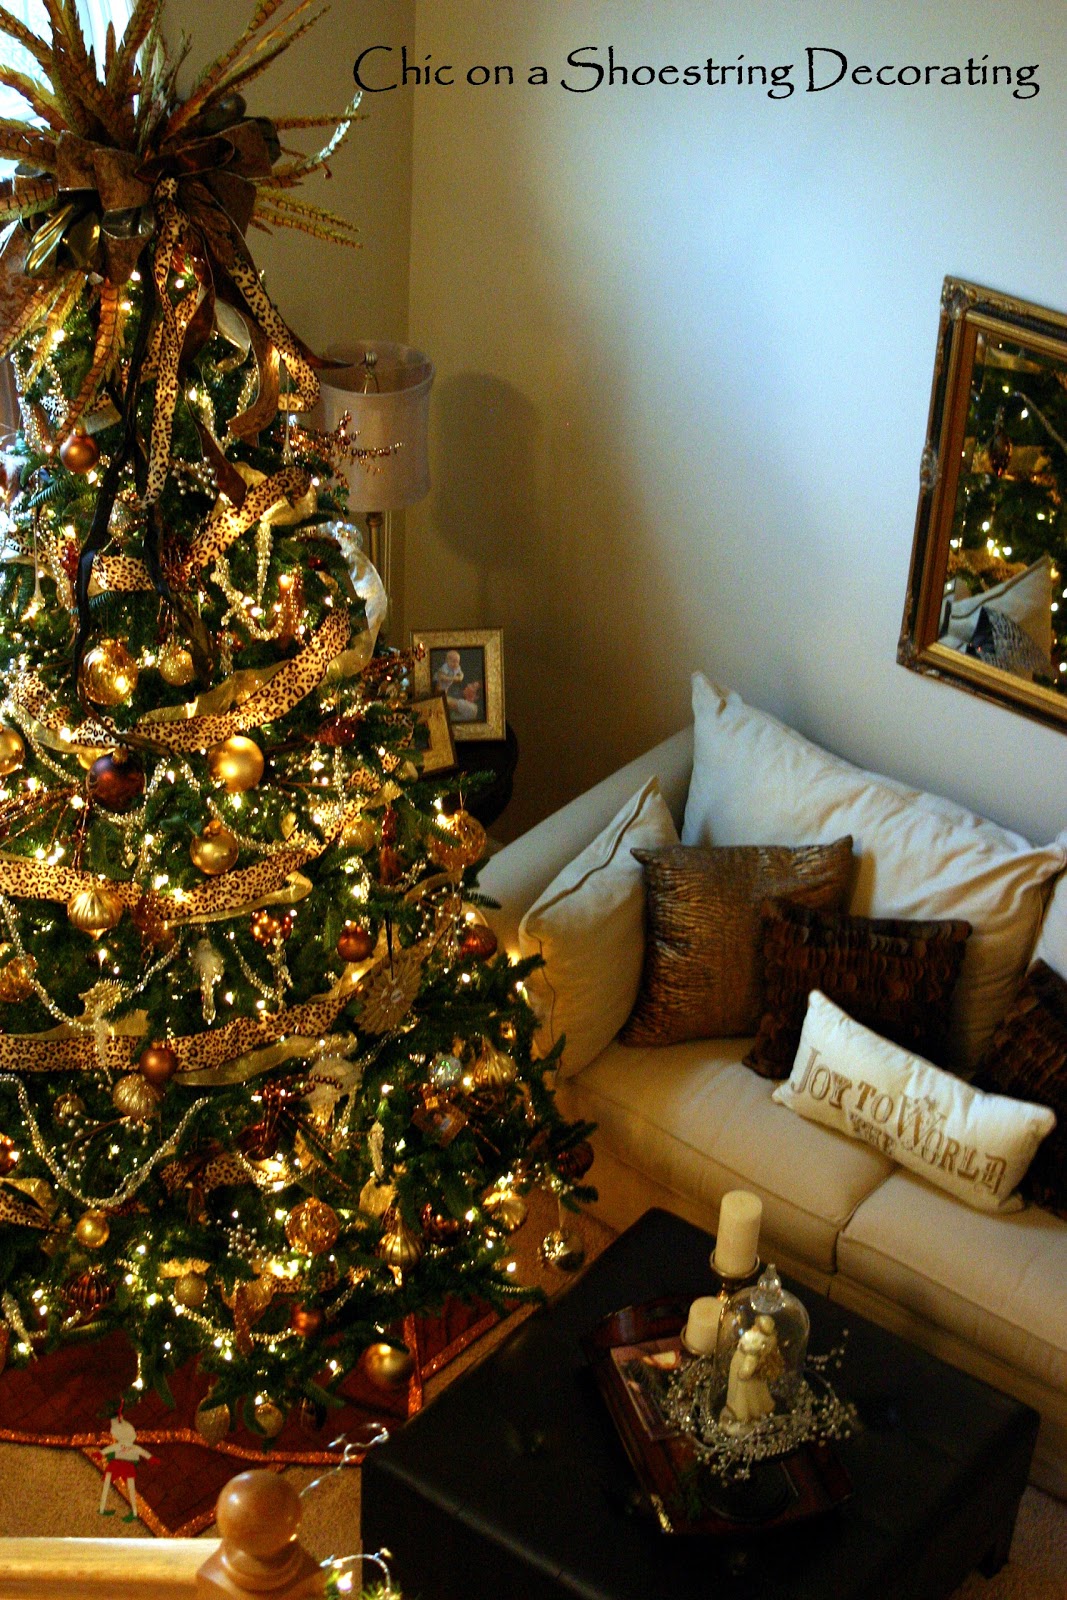 ... Decorating: My Fancy Christmas Tree with a touch of Leopard Print